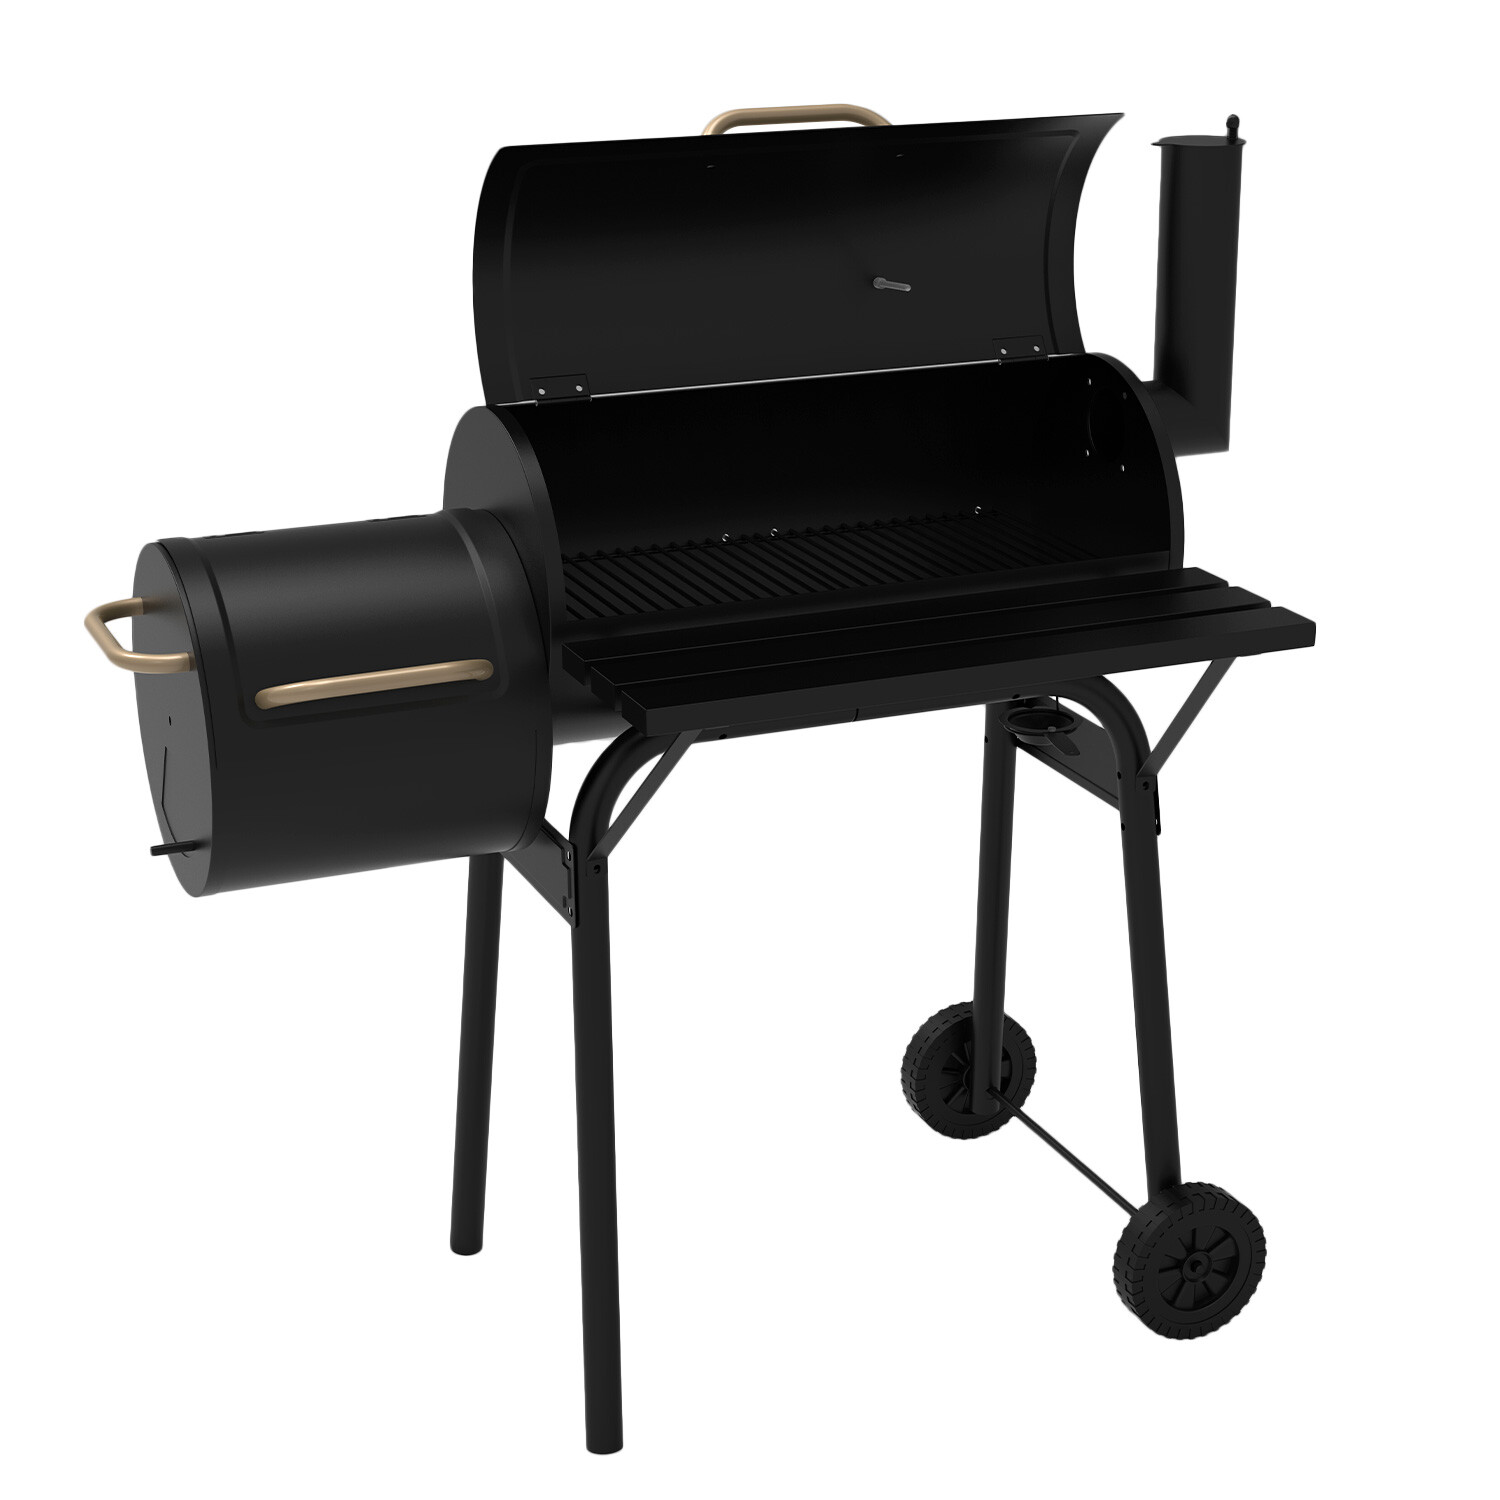 Houston Smoker BBQ with Grill Gold Handles - Black Image